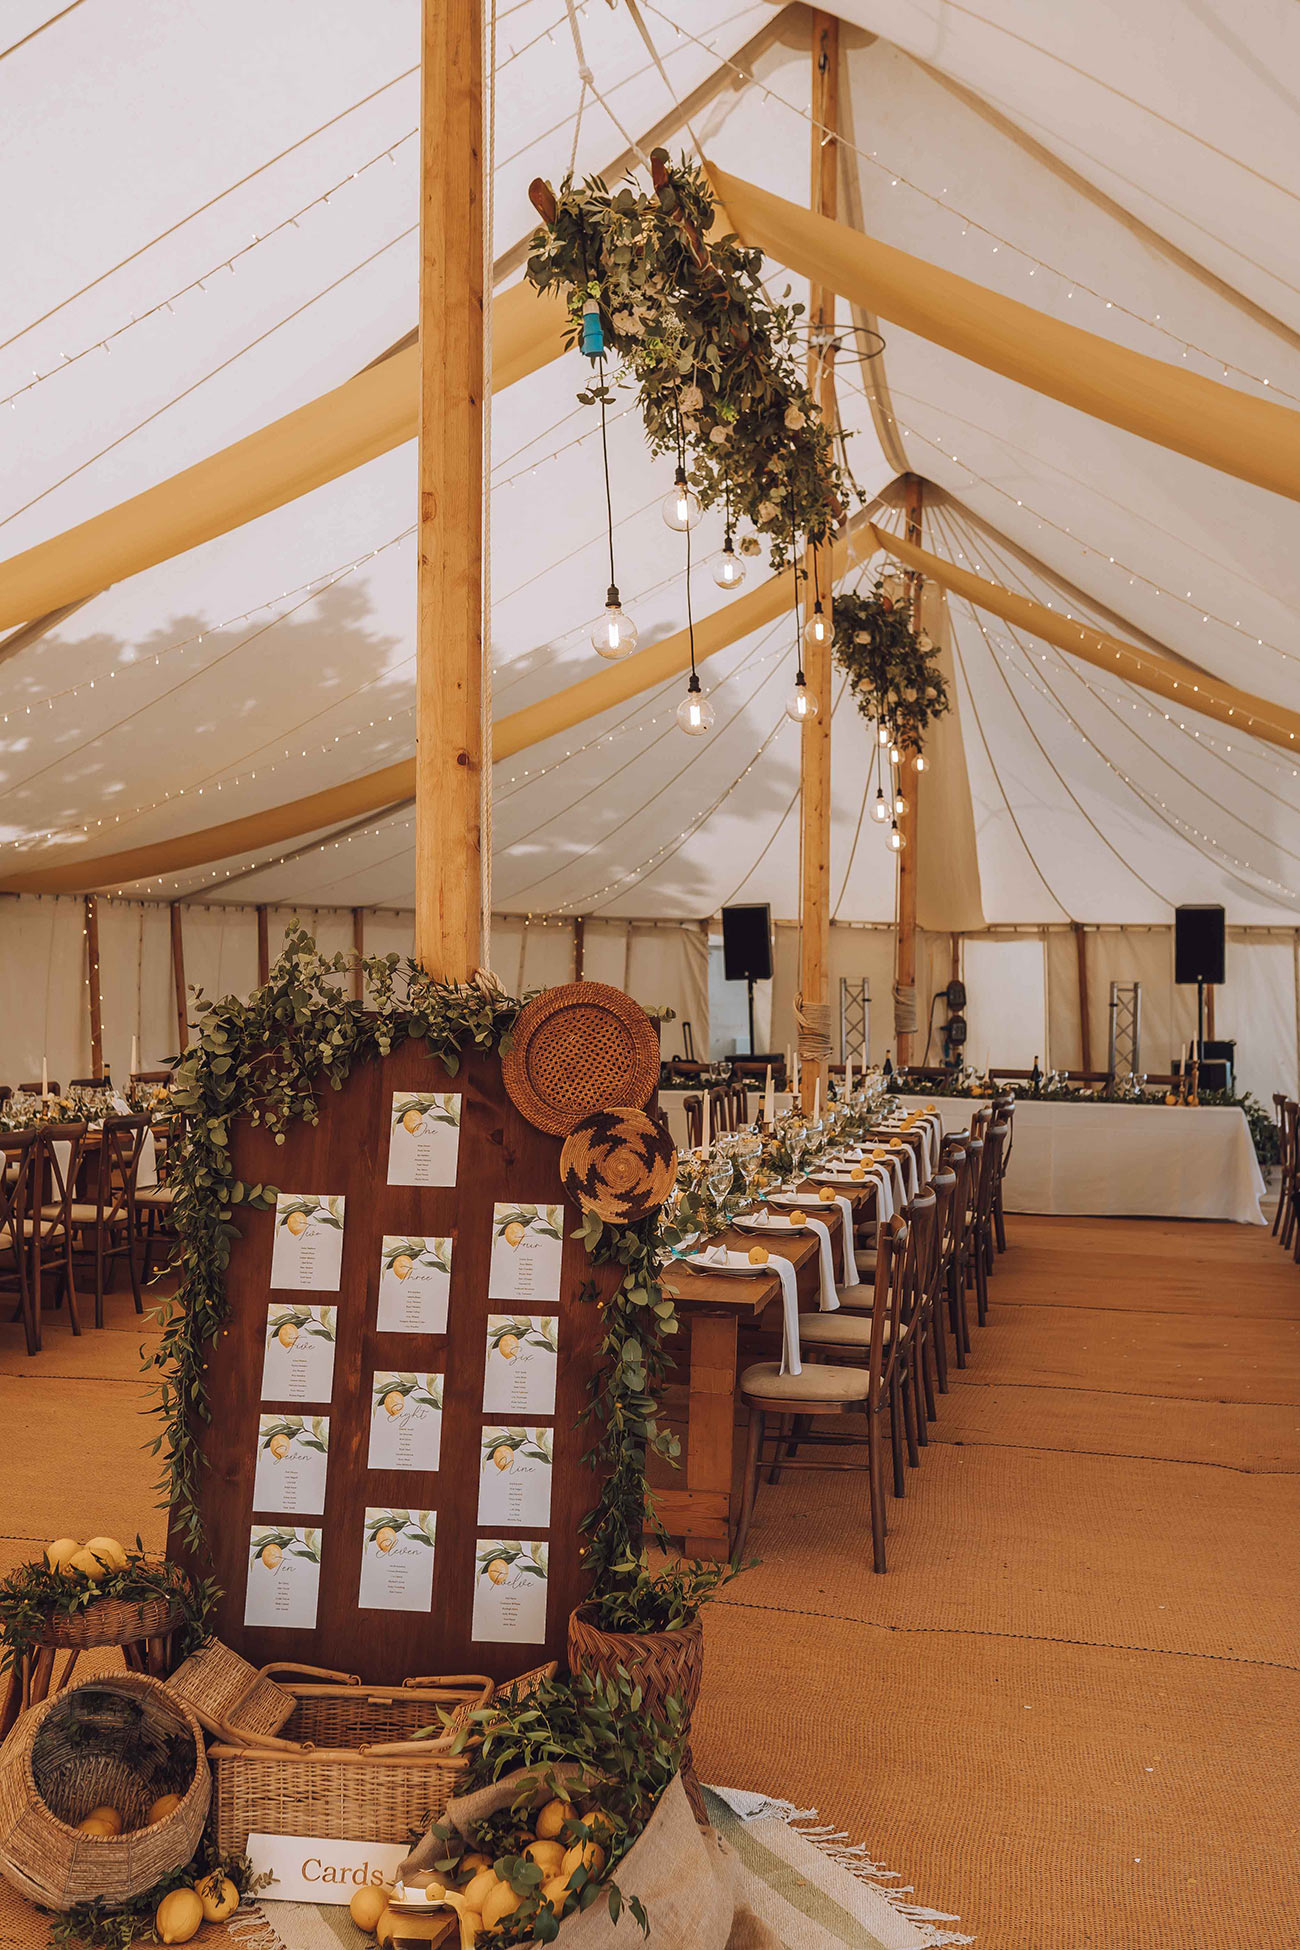 The wedding marquee all ready for the wedding reception